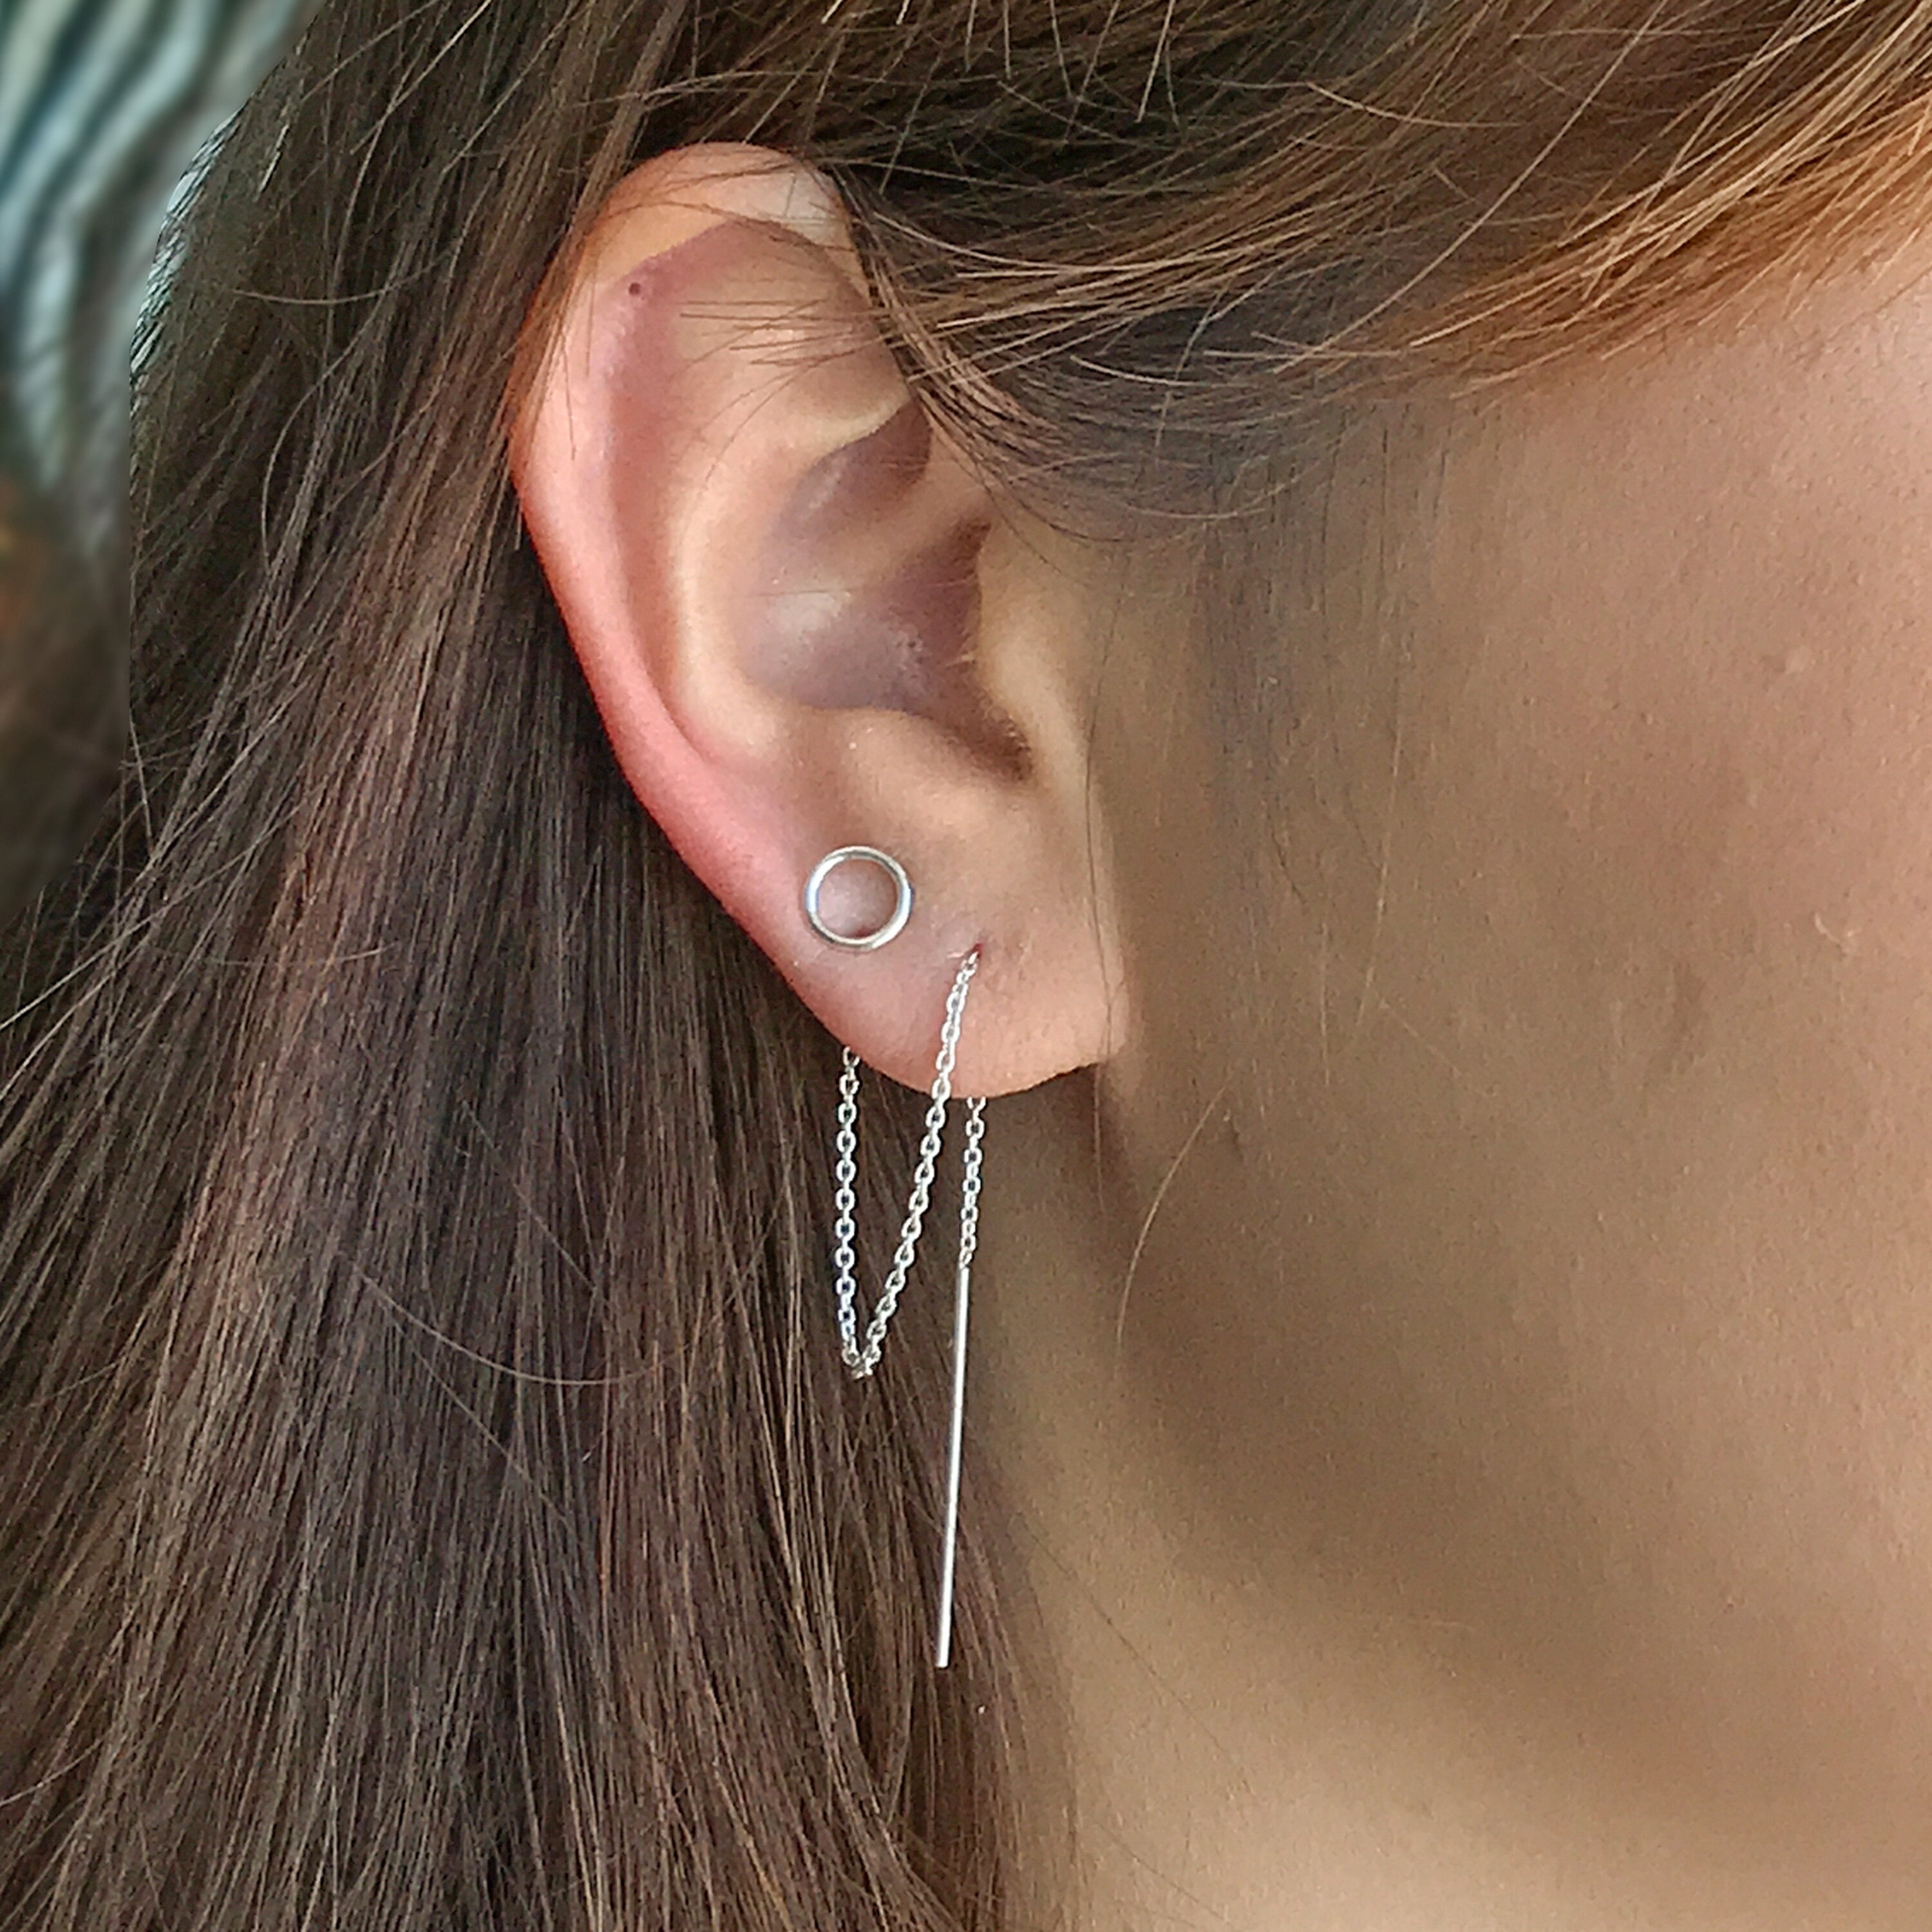 Share 211+ double earrings for two holes latest